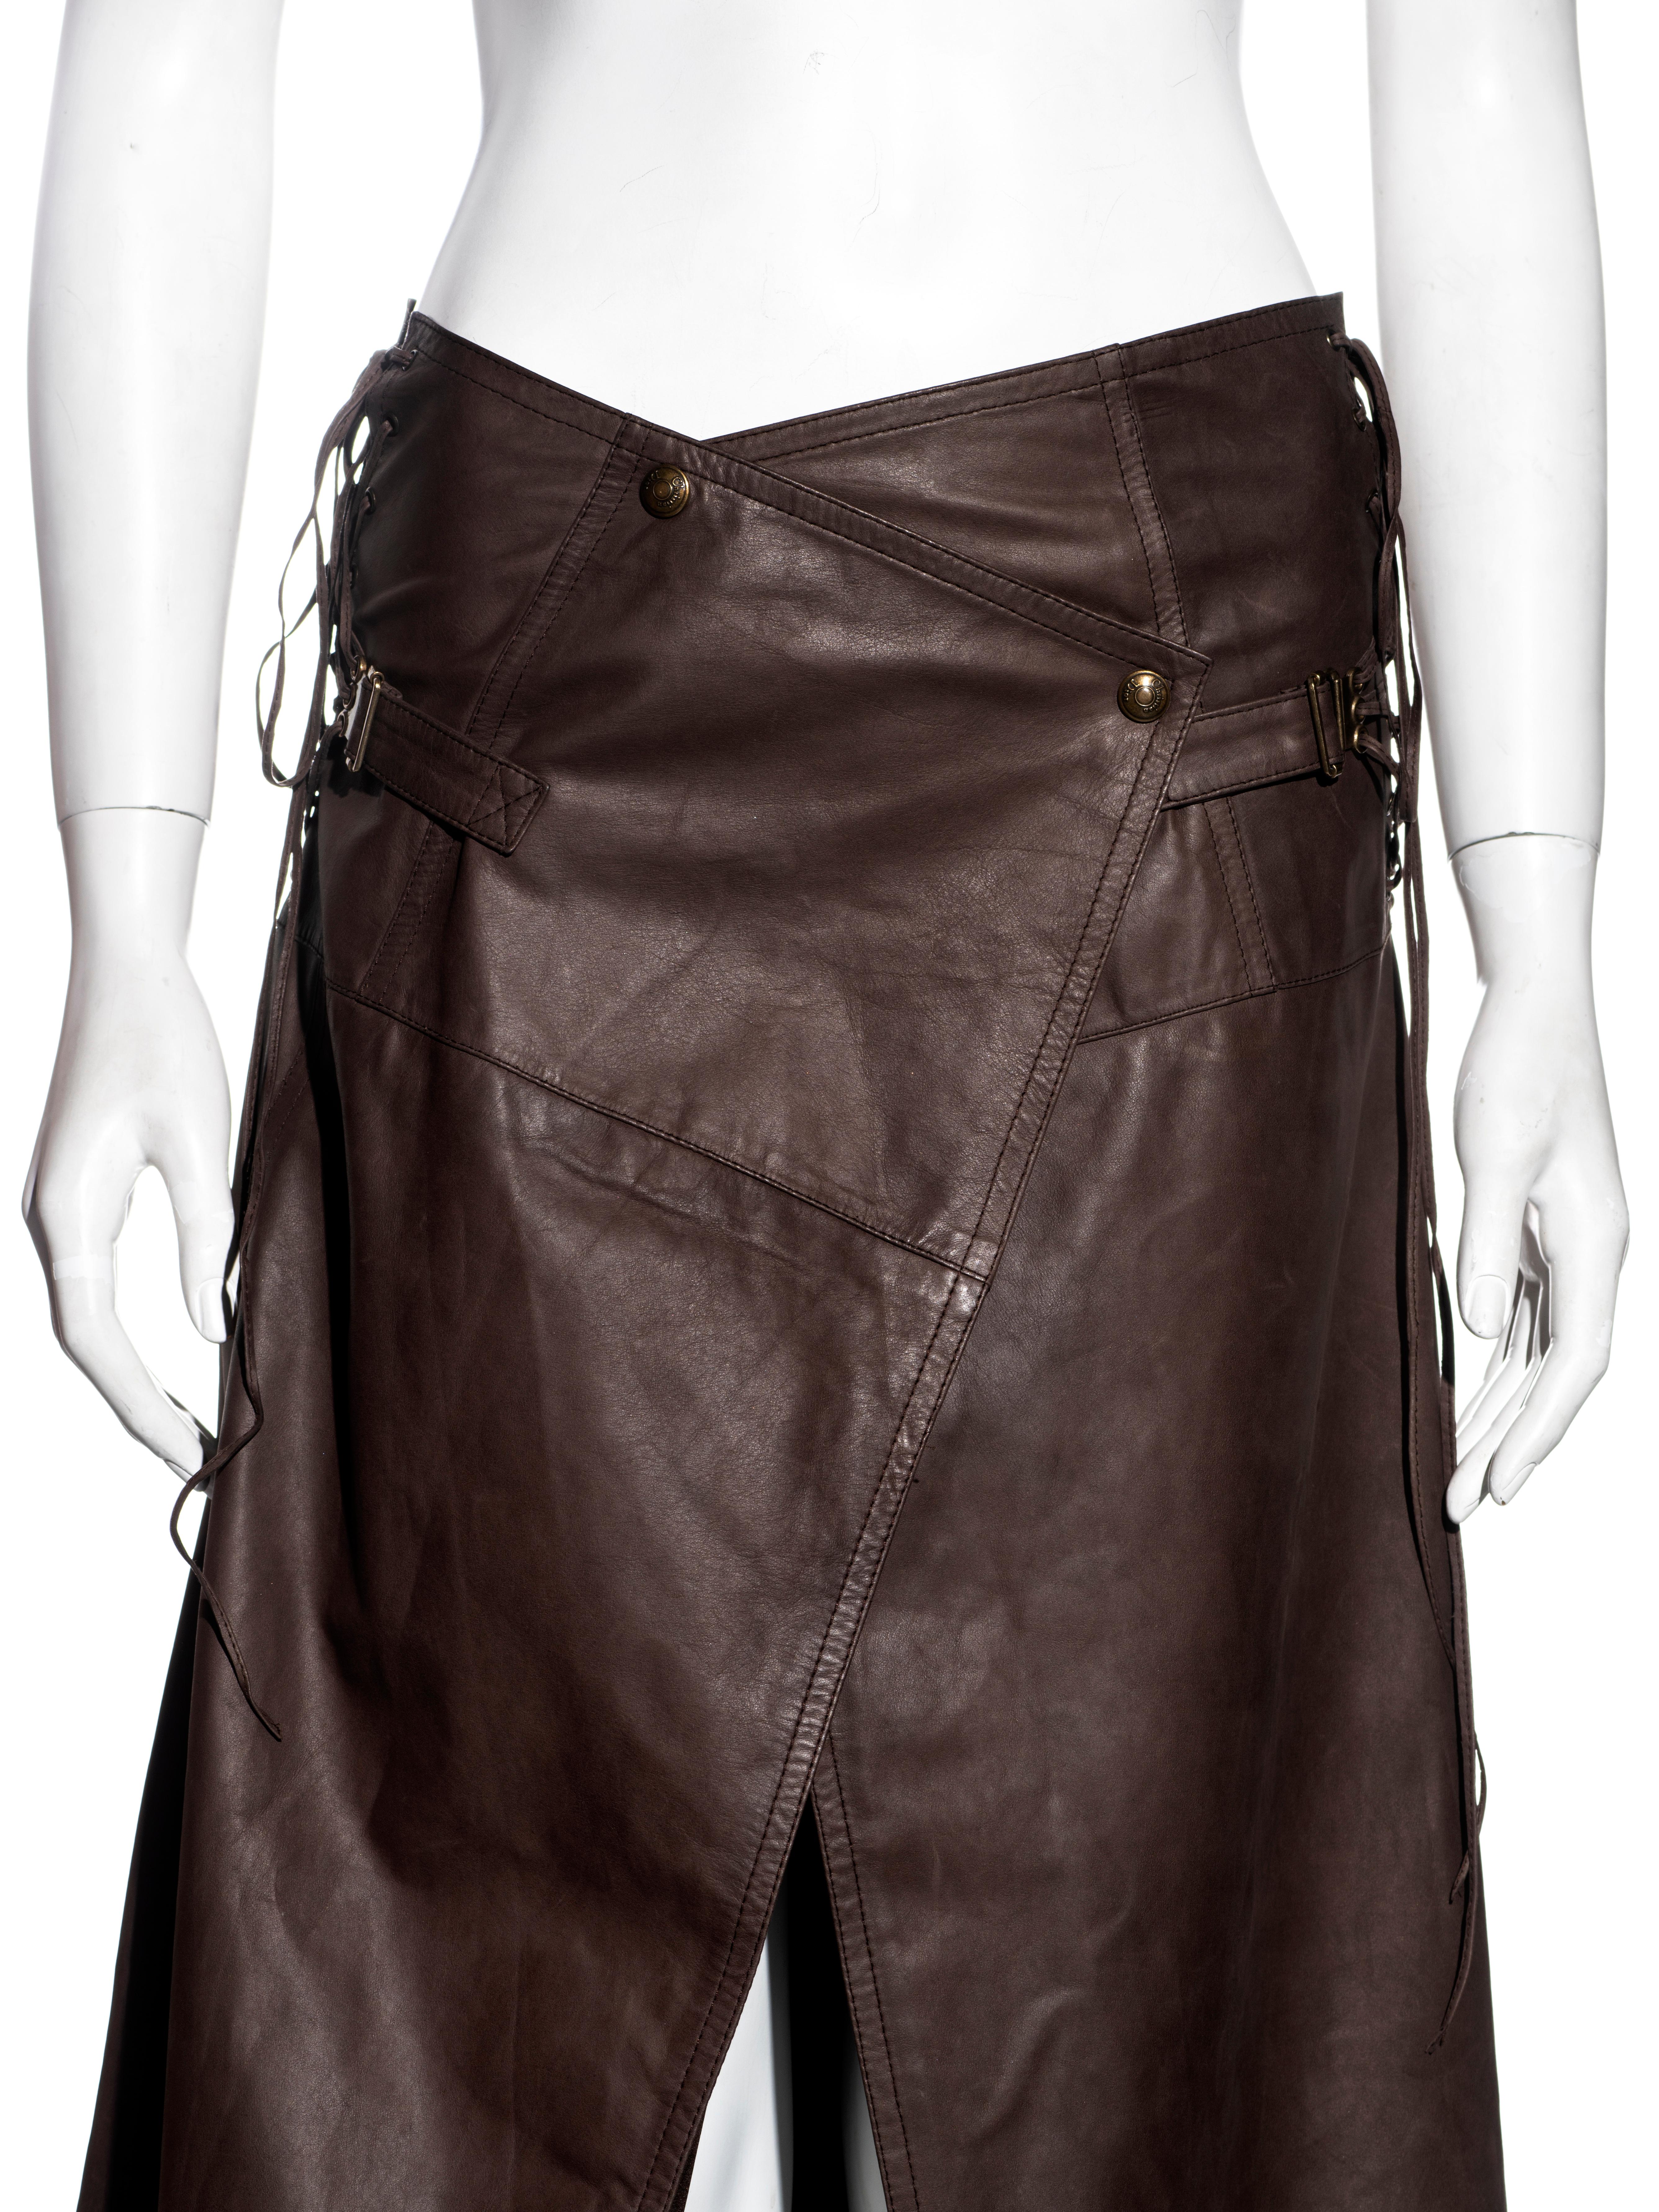 Black Christian Dior by John Galliano brown leather wrap skirt, ss 2001